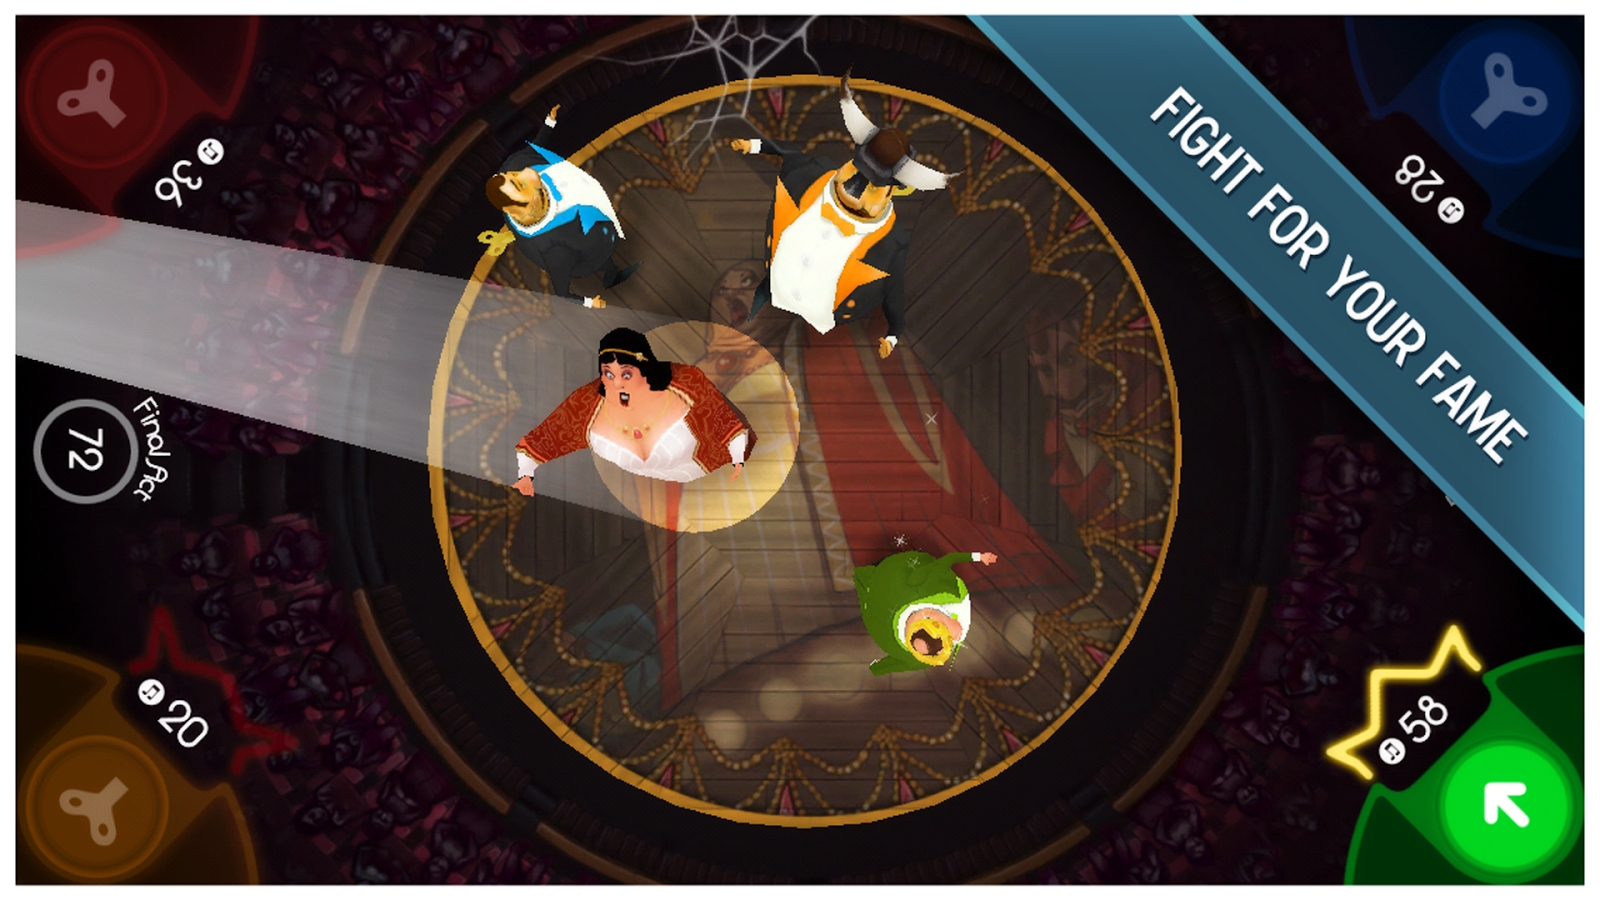 King of Opera - Party Game!